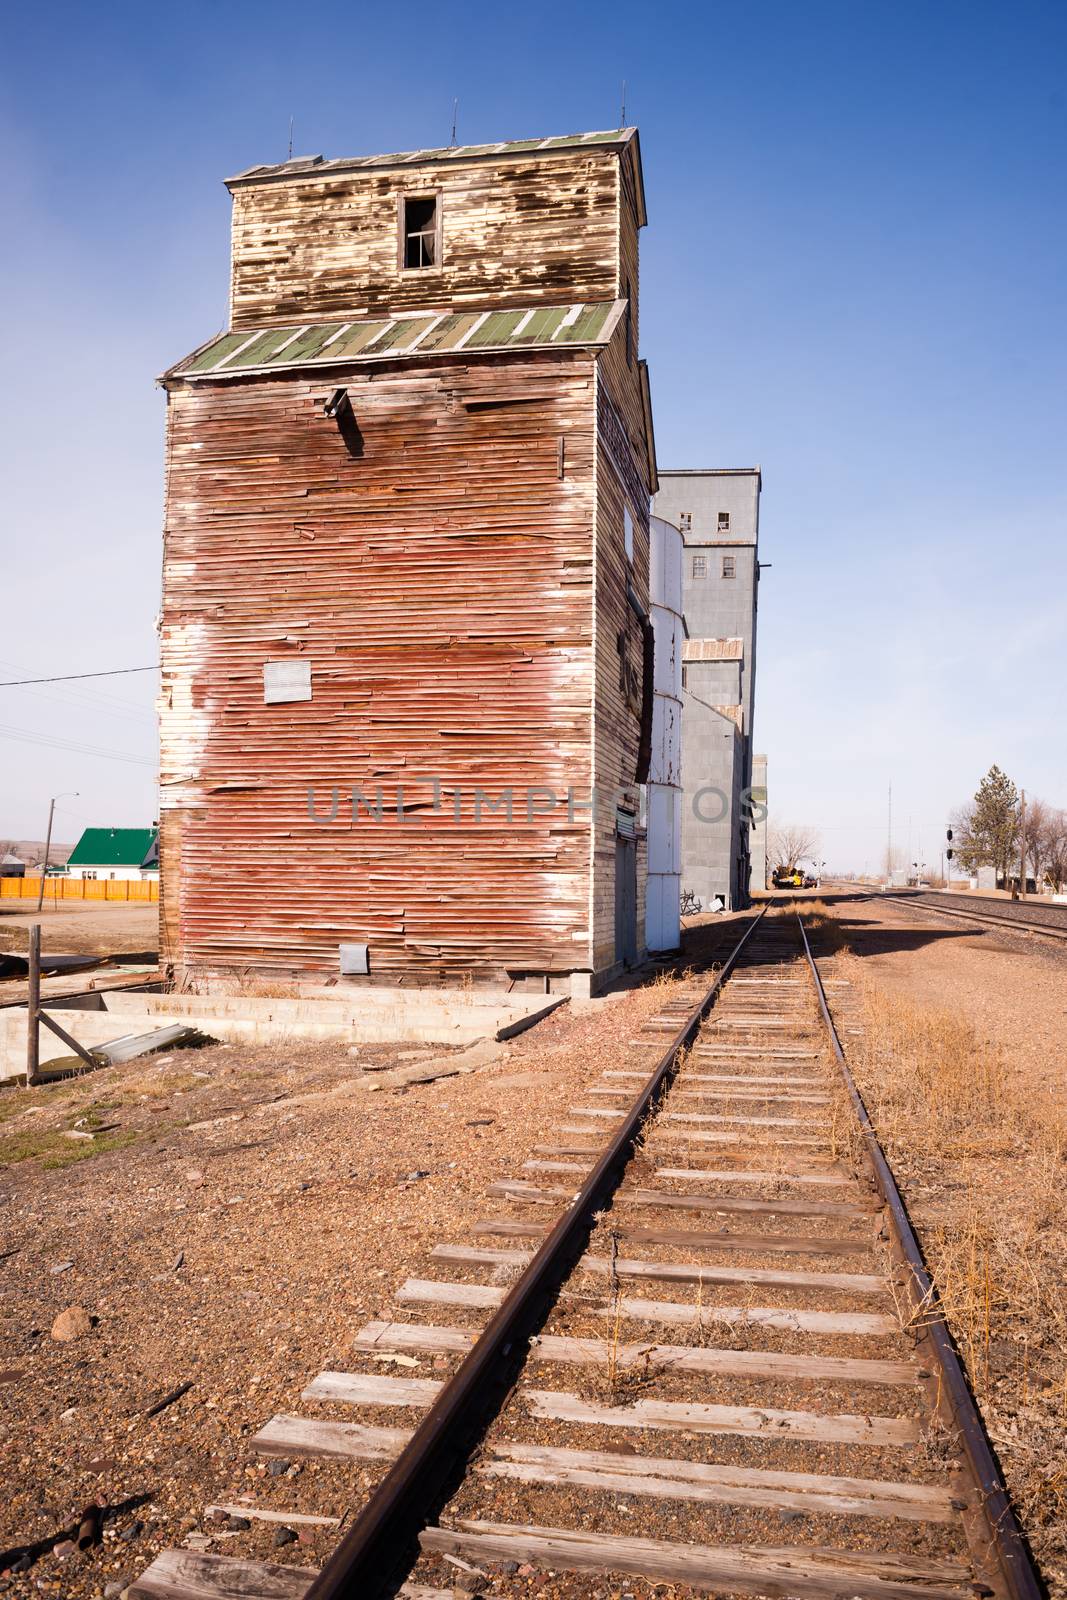 Forgotten Railroad Siding Train Tracks Wood Silo Building by ChrisBoswell